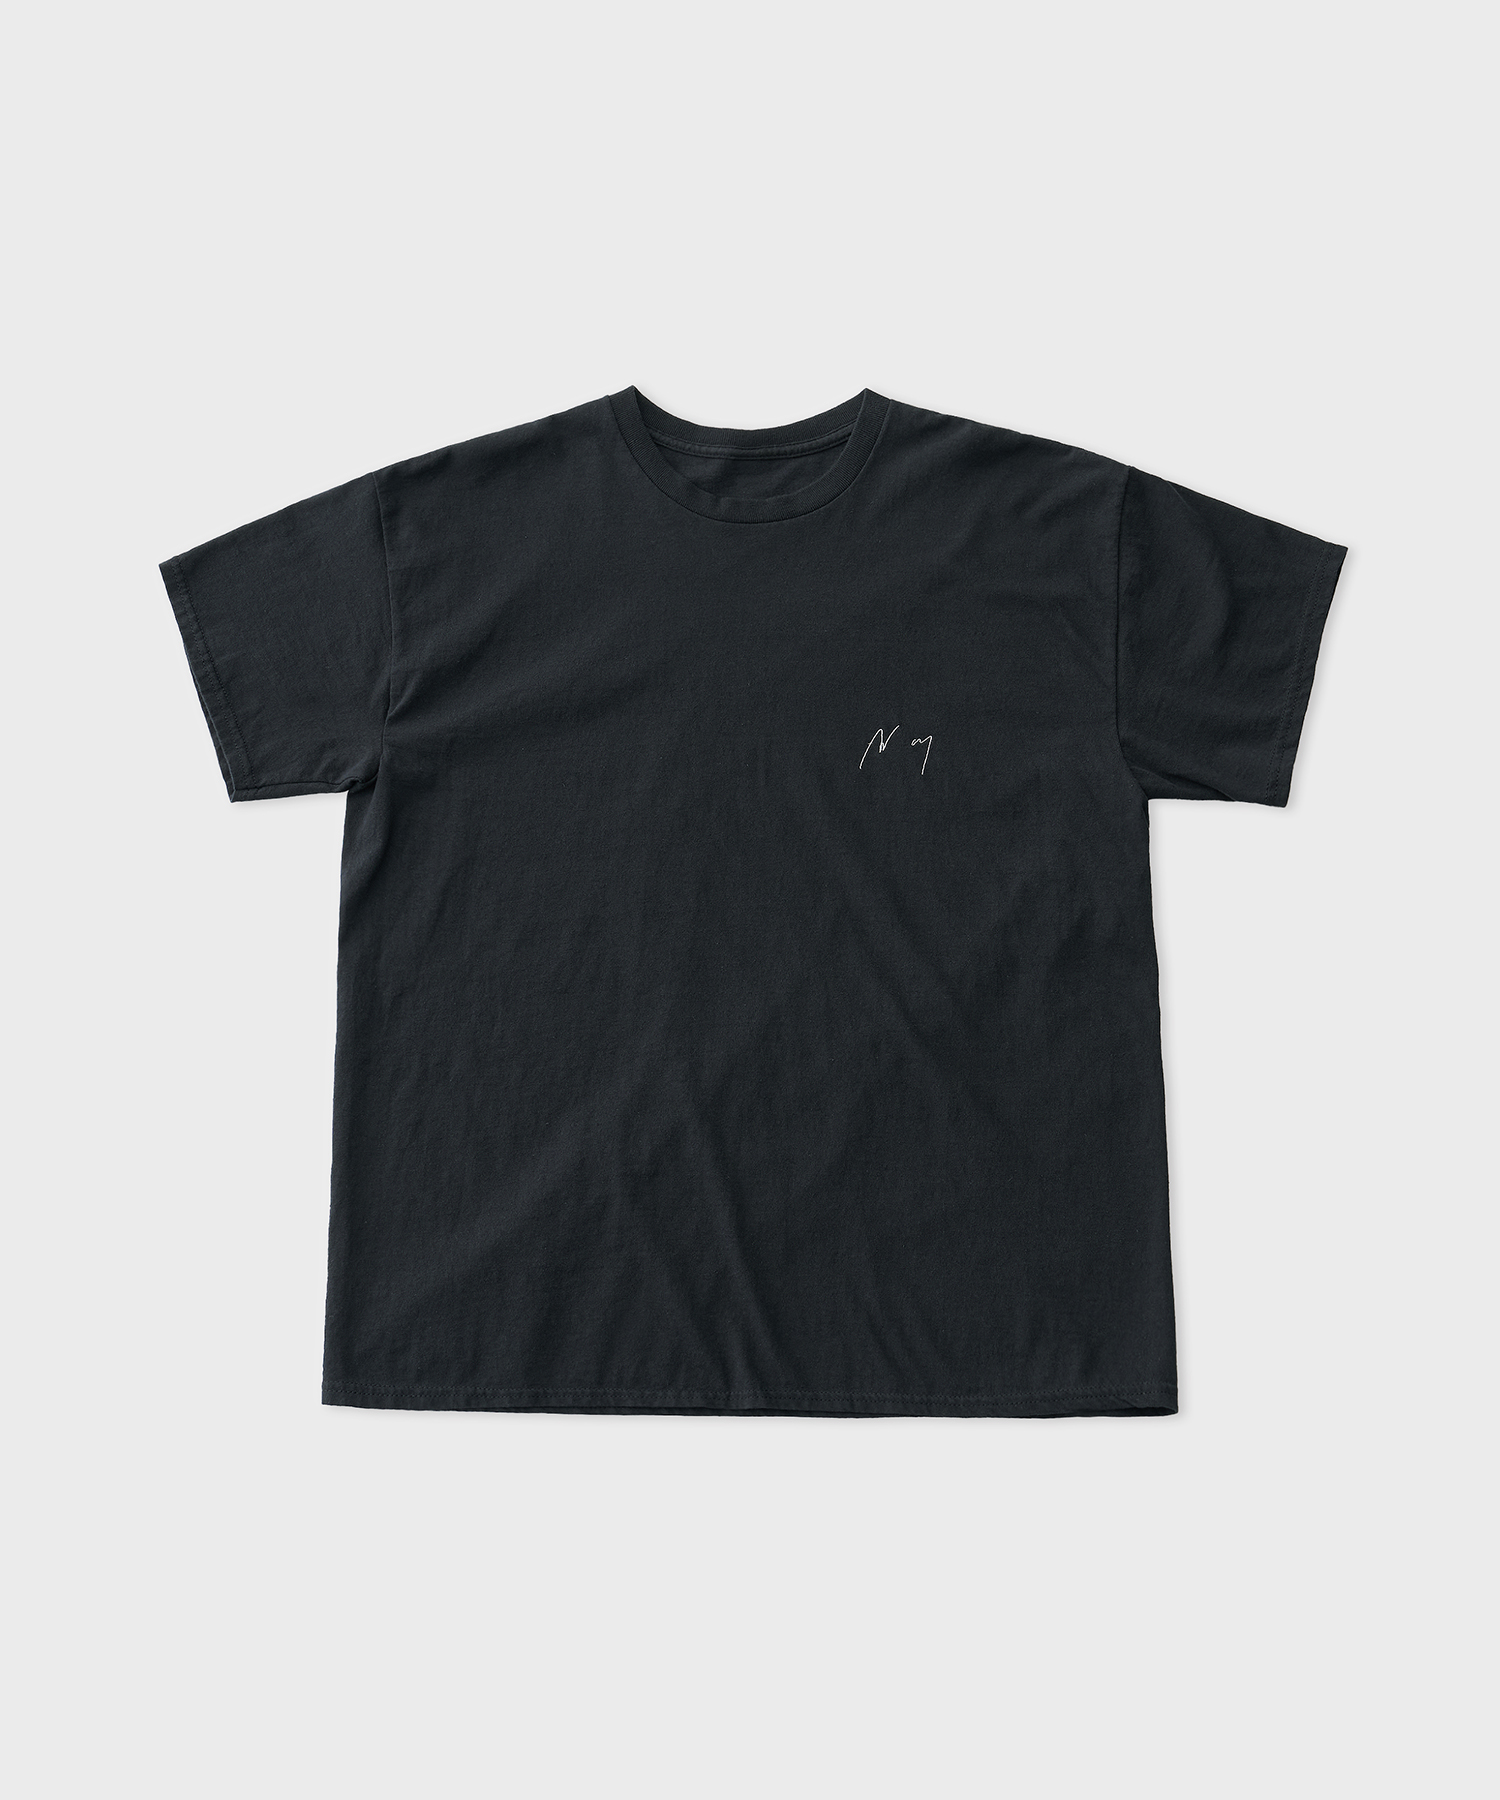 Embroidery T-shirt (Black)